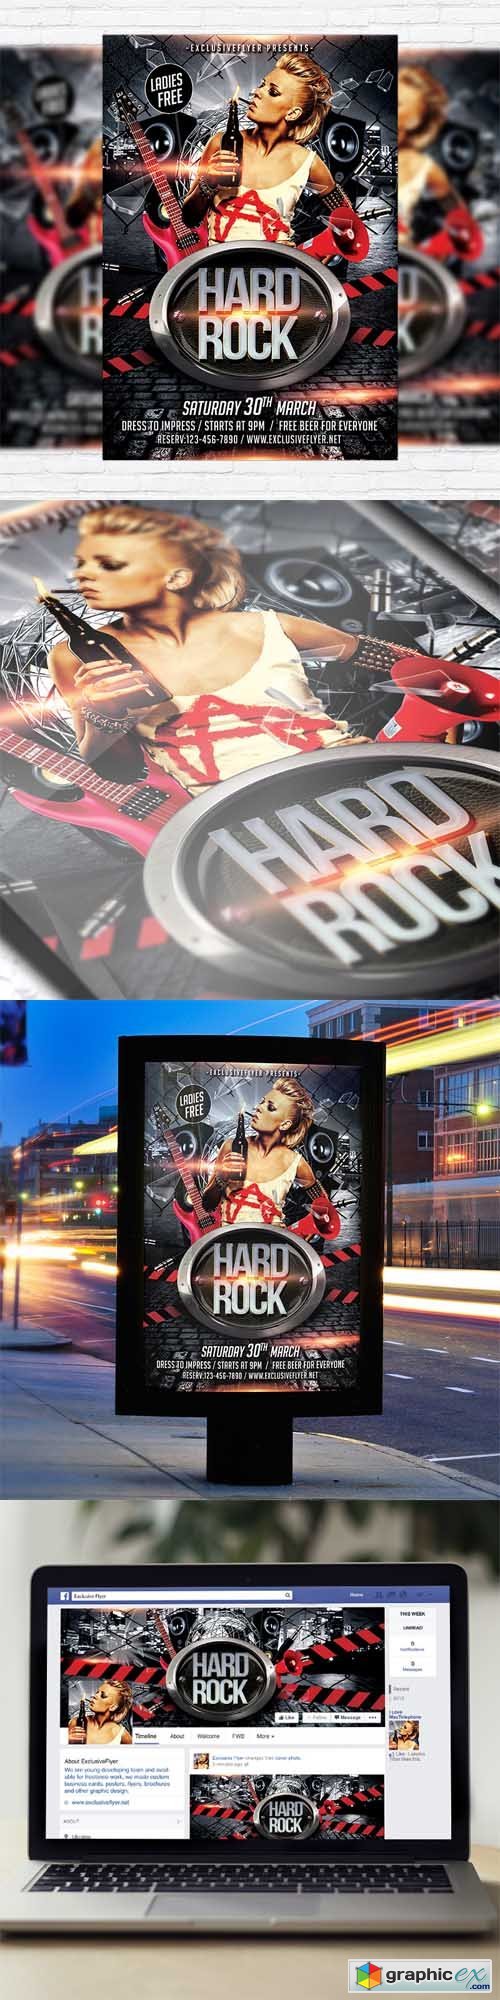 Hard Rock Party - Flyer Template + Facebook Cover